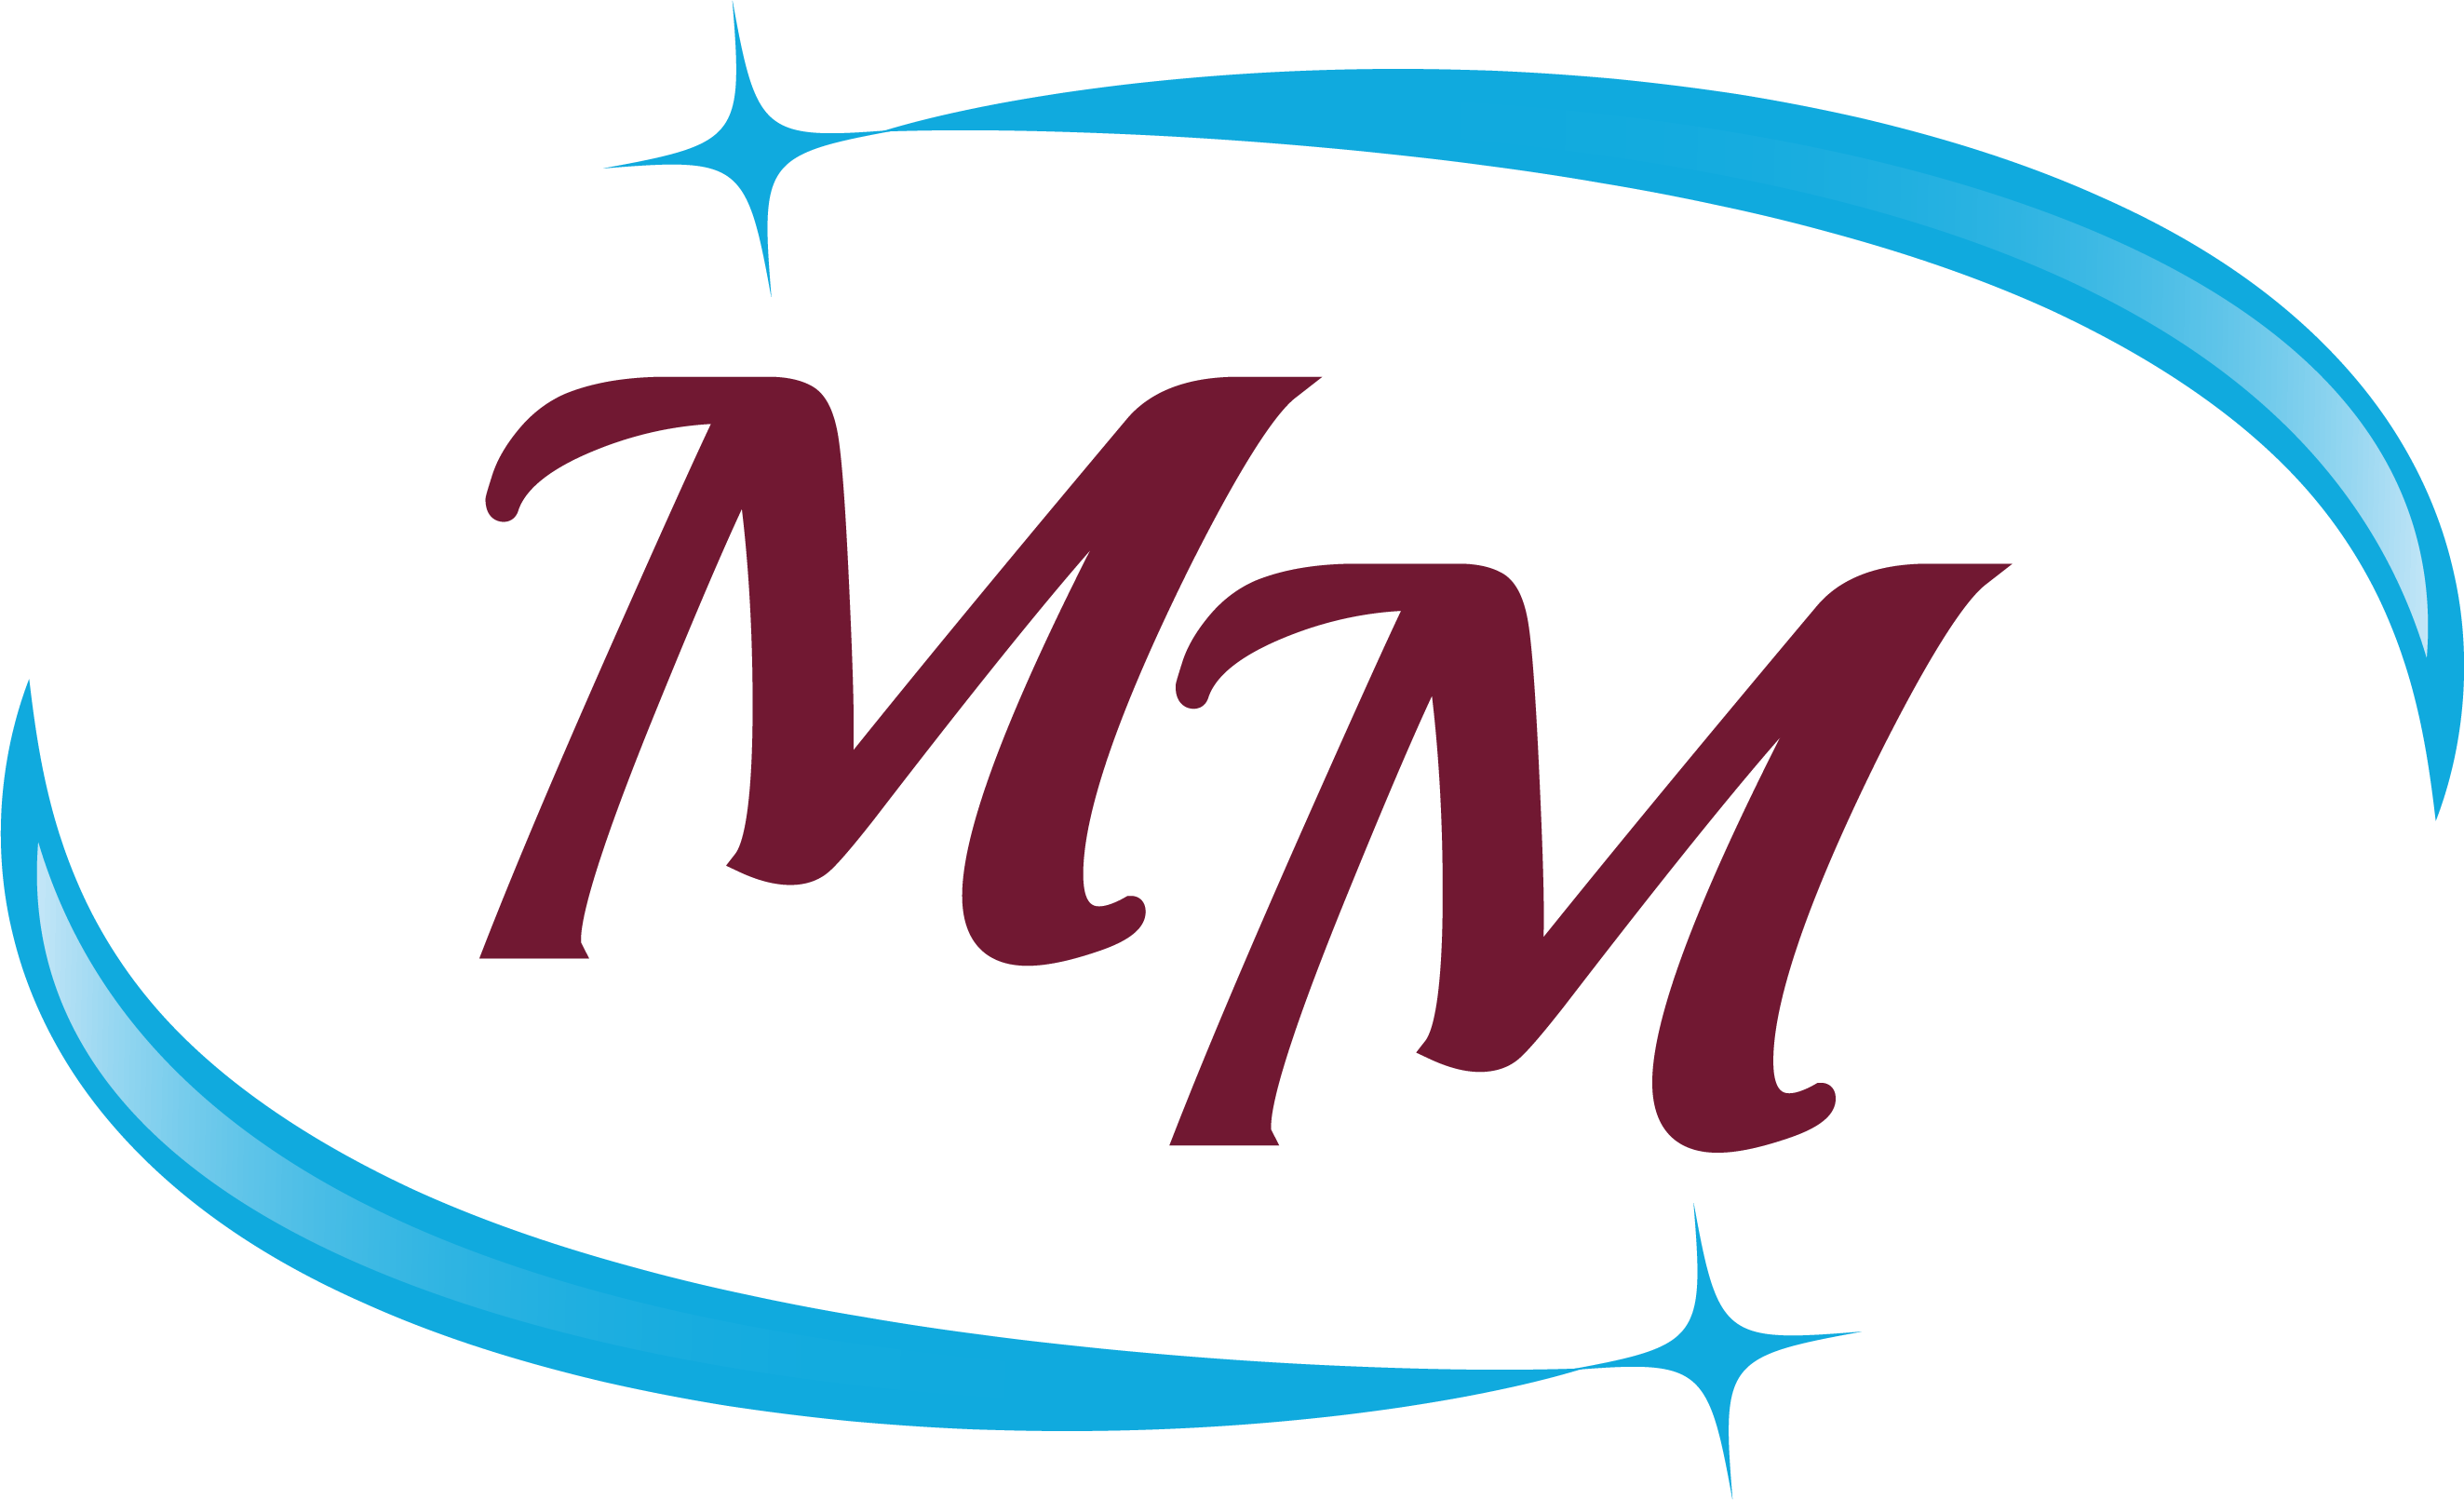 A logo of the word 'm m ' with stars in the background.